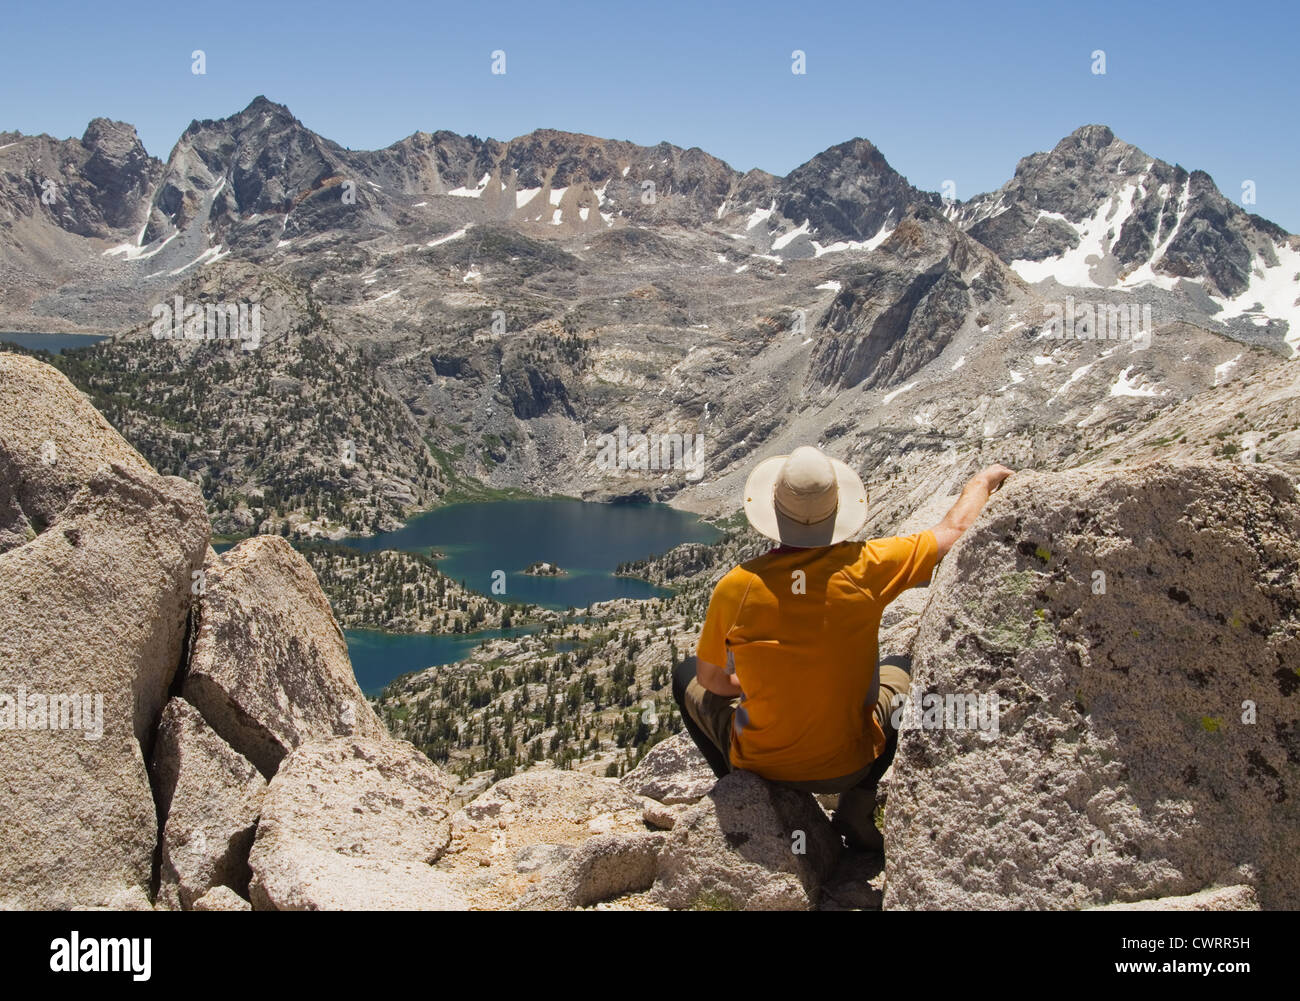 Man on top of Fin Dome enjoying the Rae Lakes Overlook in the Sierra Nevada mountains Stock Photo